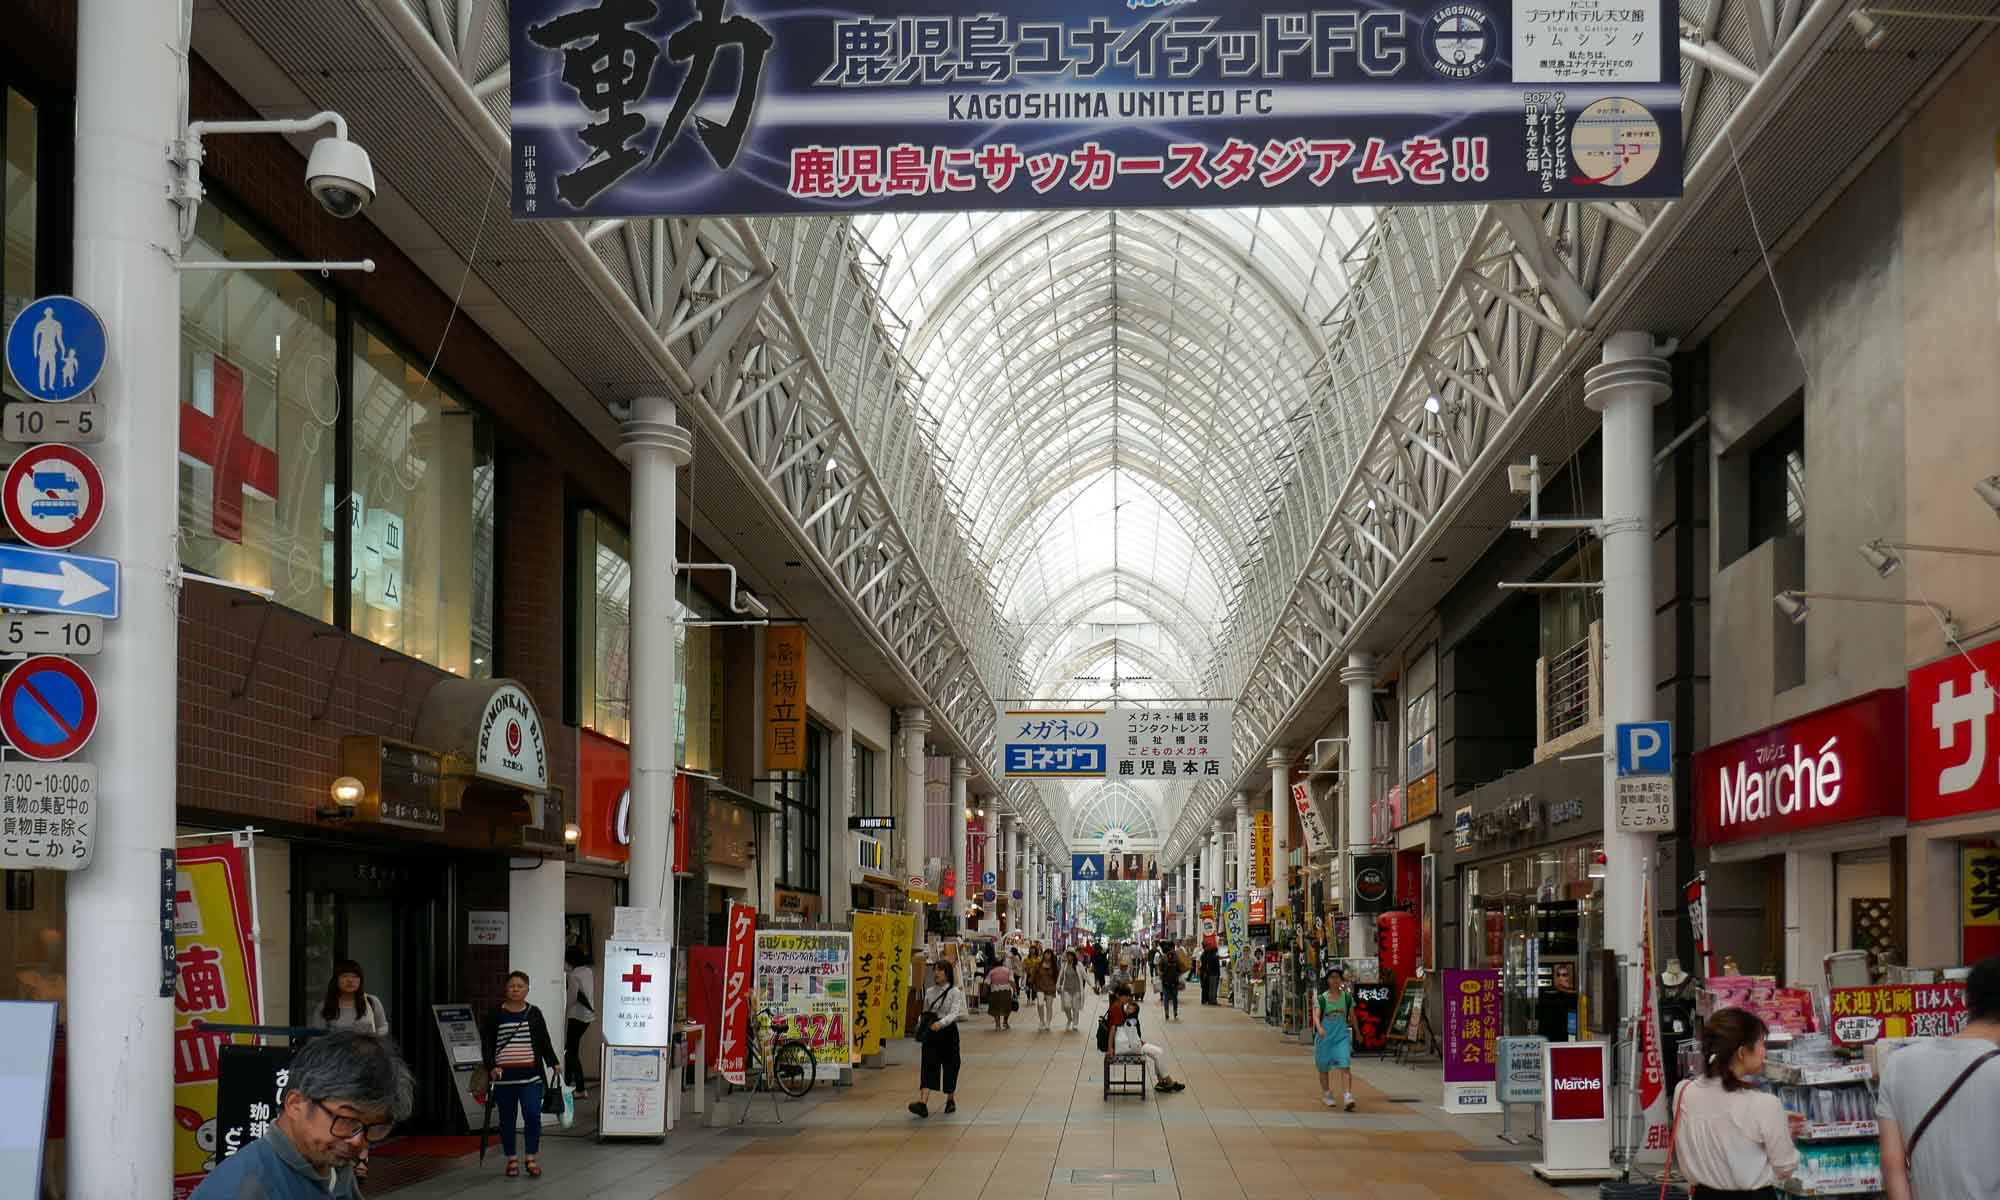 Tenmonkan shopping arcade has a roof to protect from sun and volcanic ash